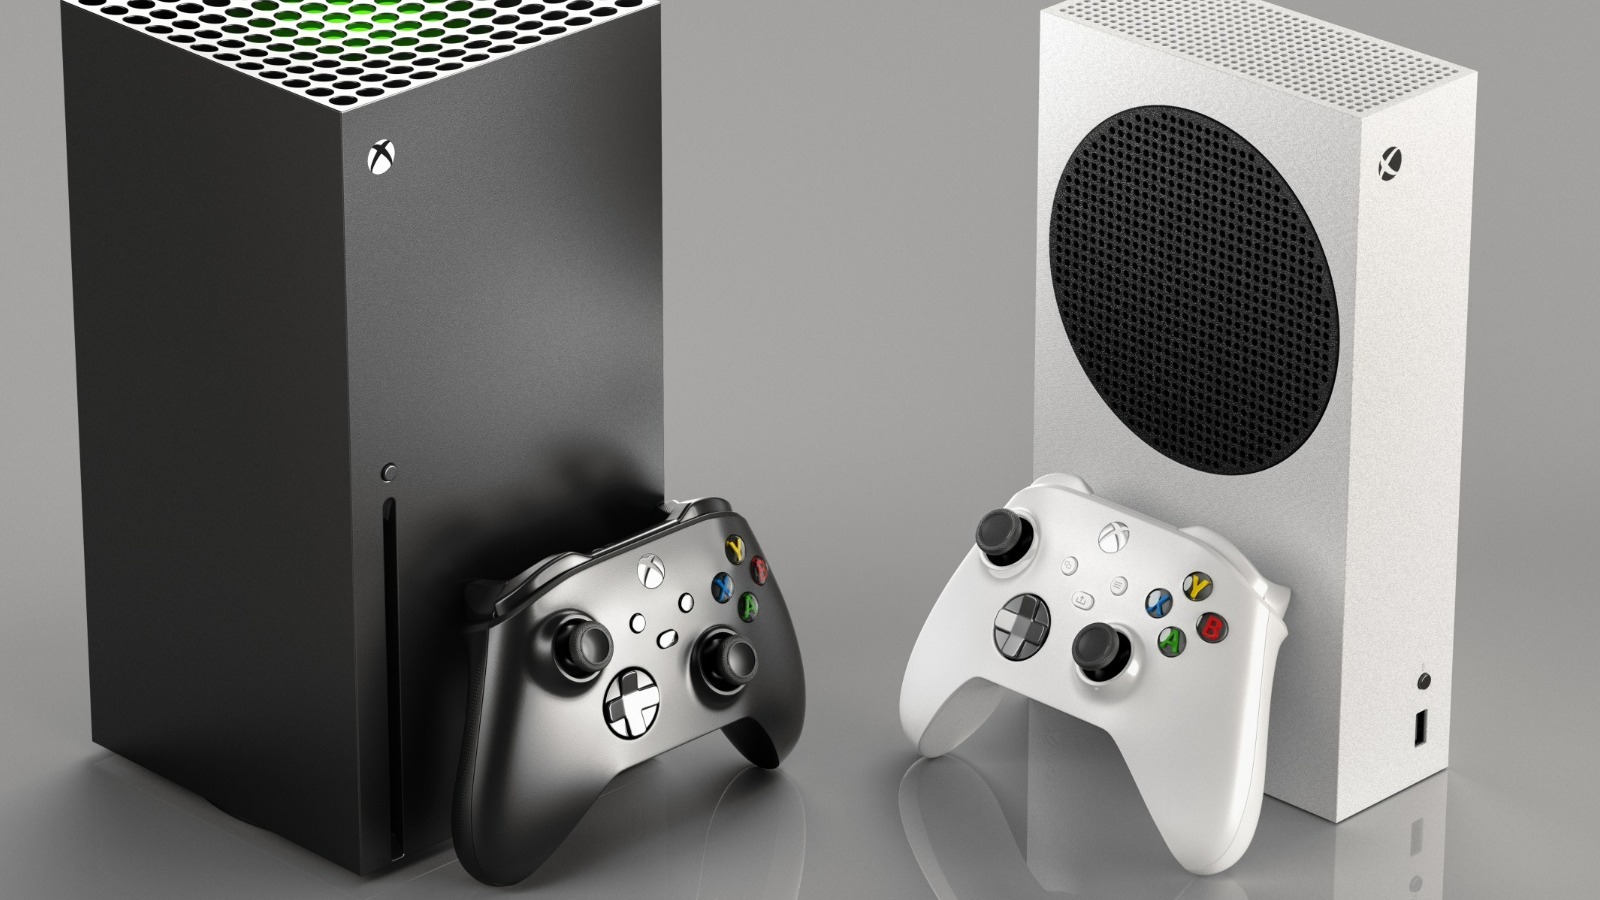 The Best Xbox Series X and Series S Accessories To Level Up Your Console Gaming  Setup